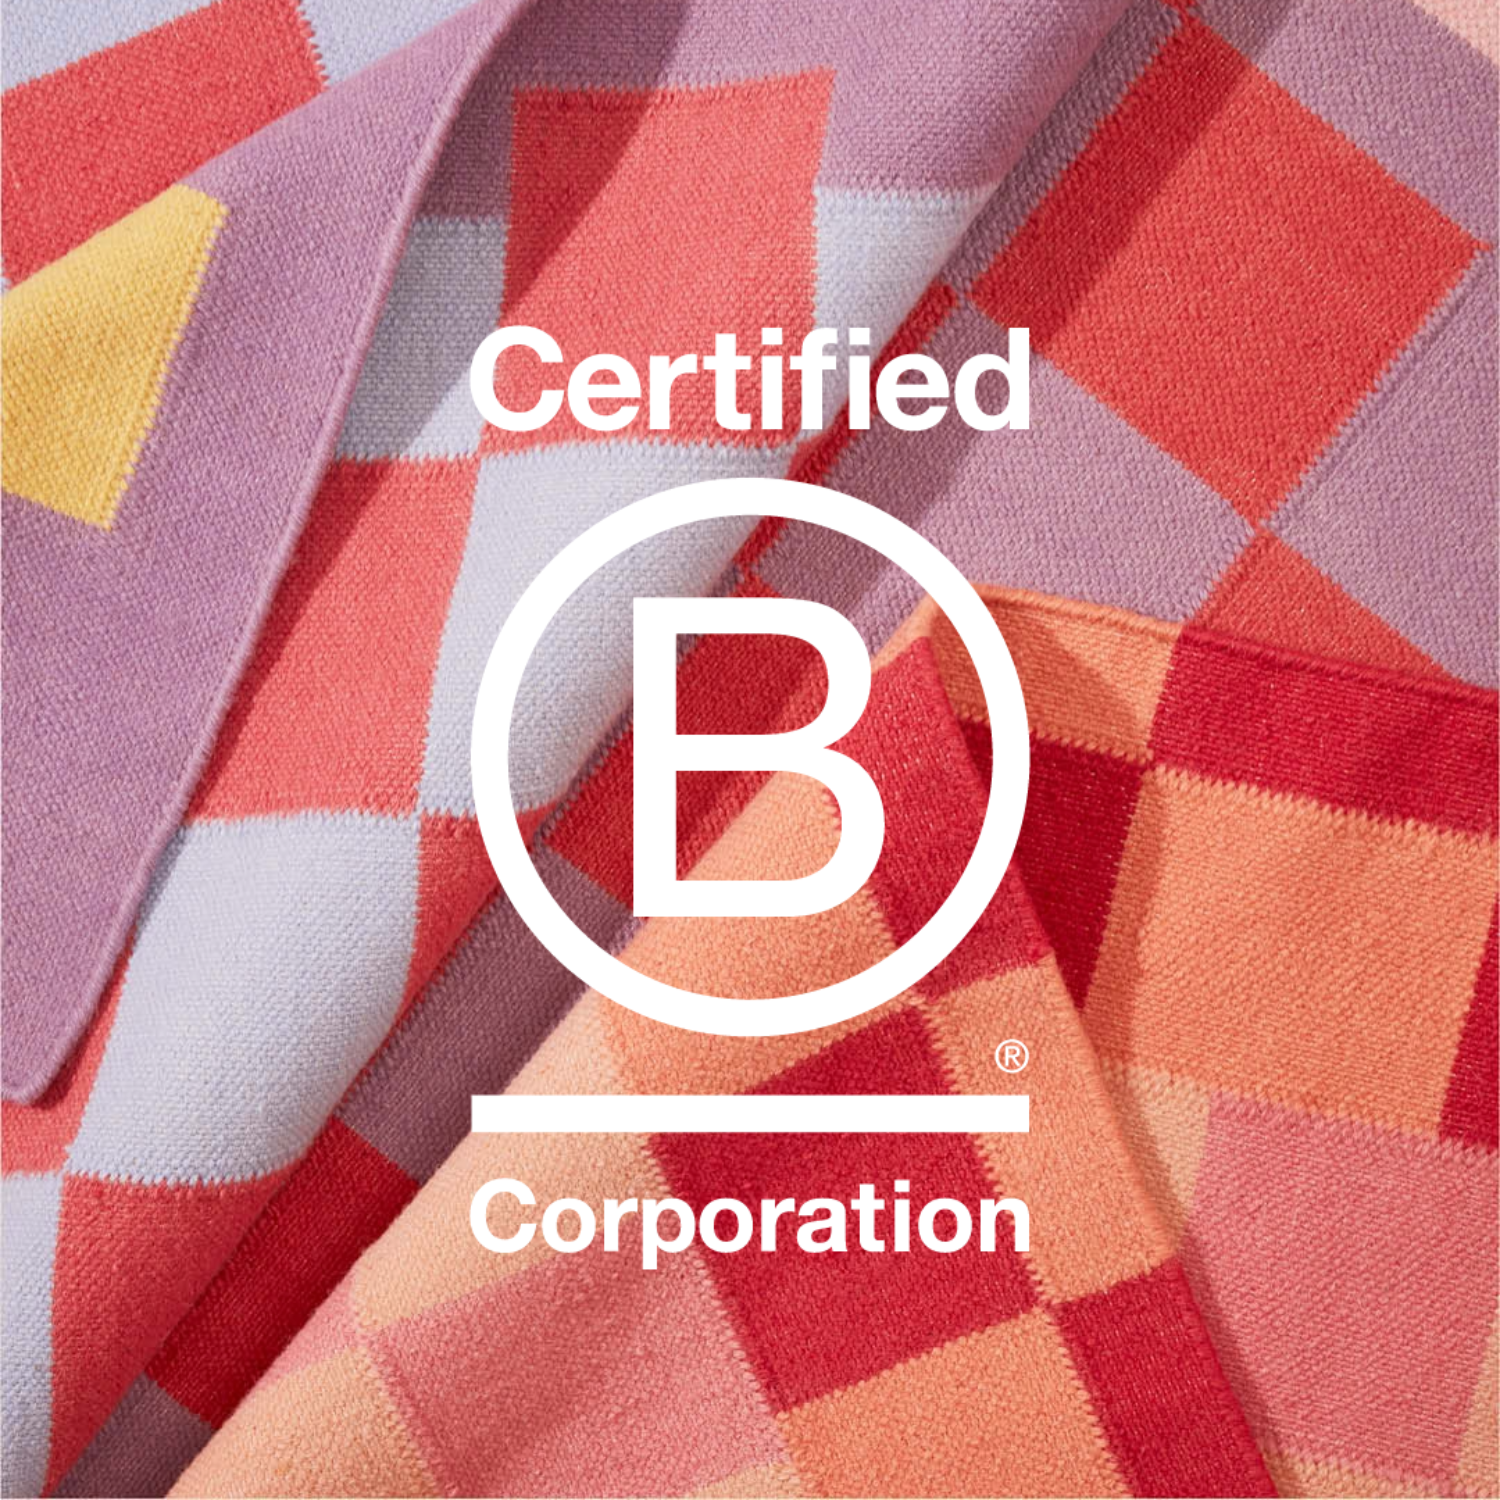 We're a B Corp